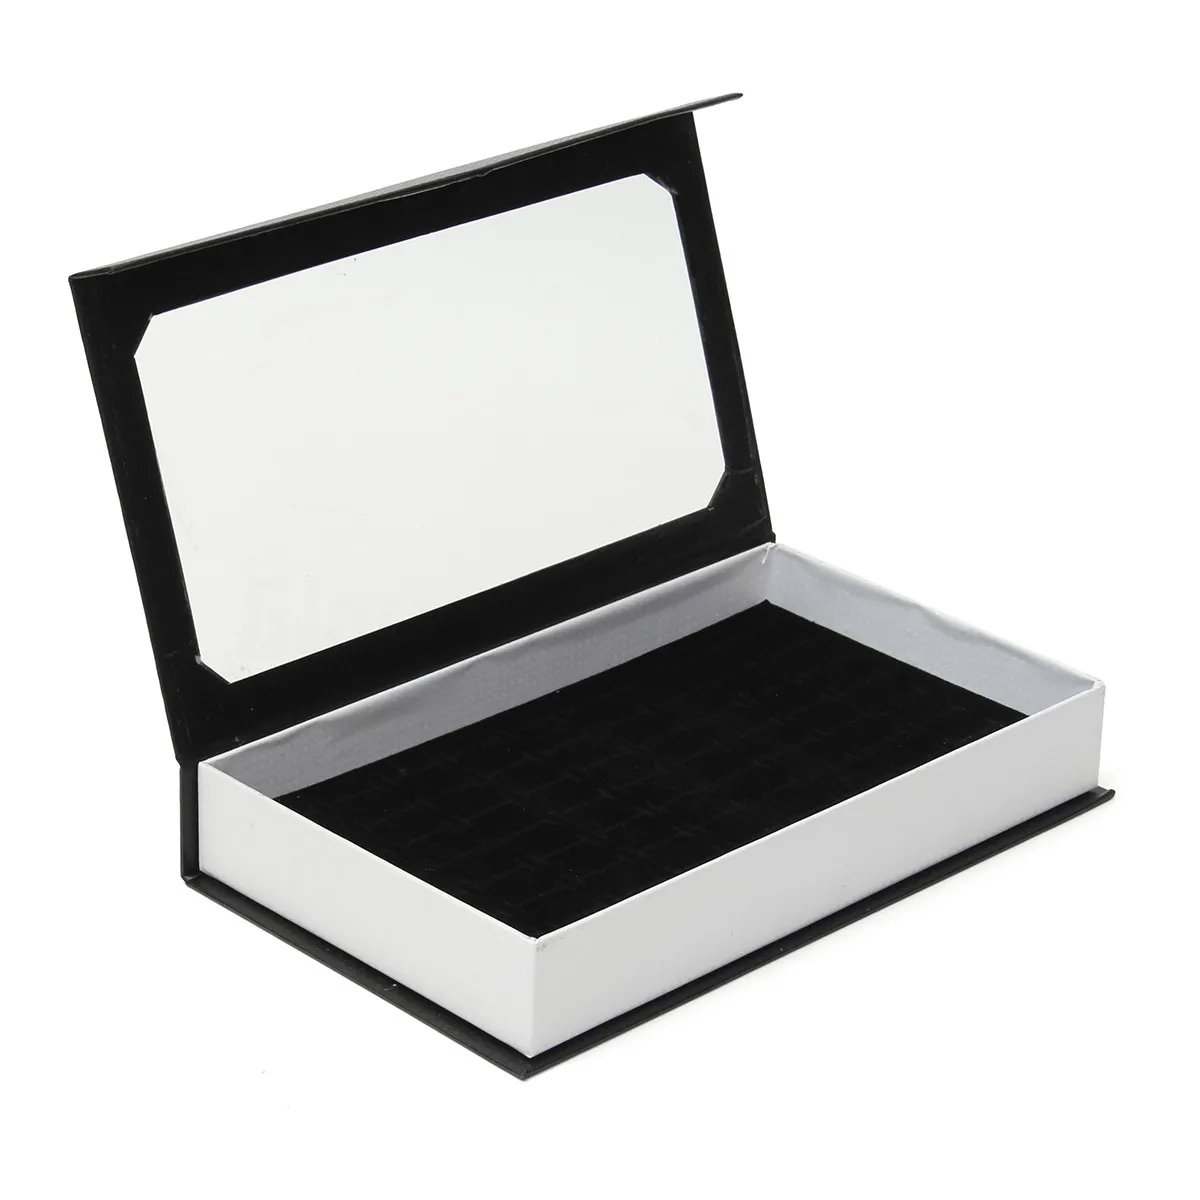 

72 Ring Jewellery Display Storage Box Tray Show Case Organiser Earring Holder, Black Ring Box With Cover